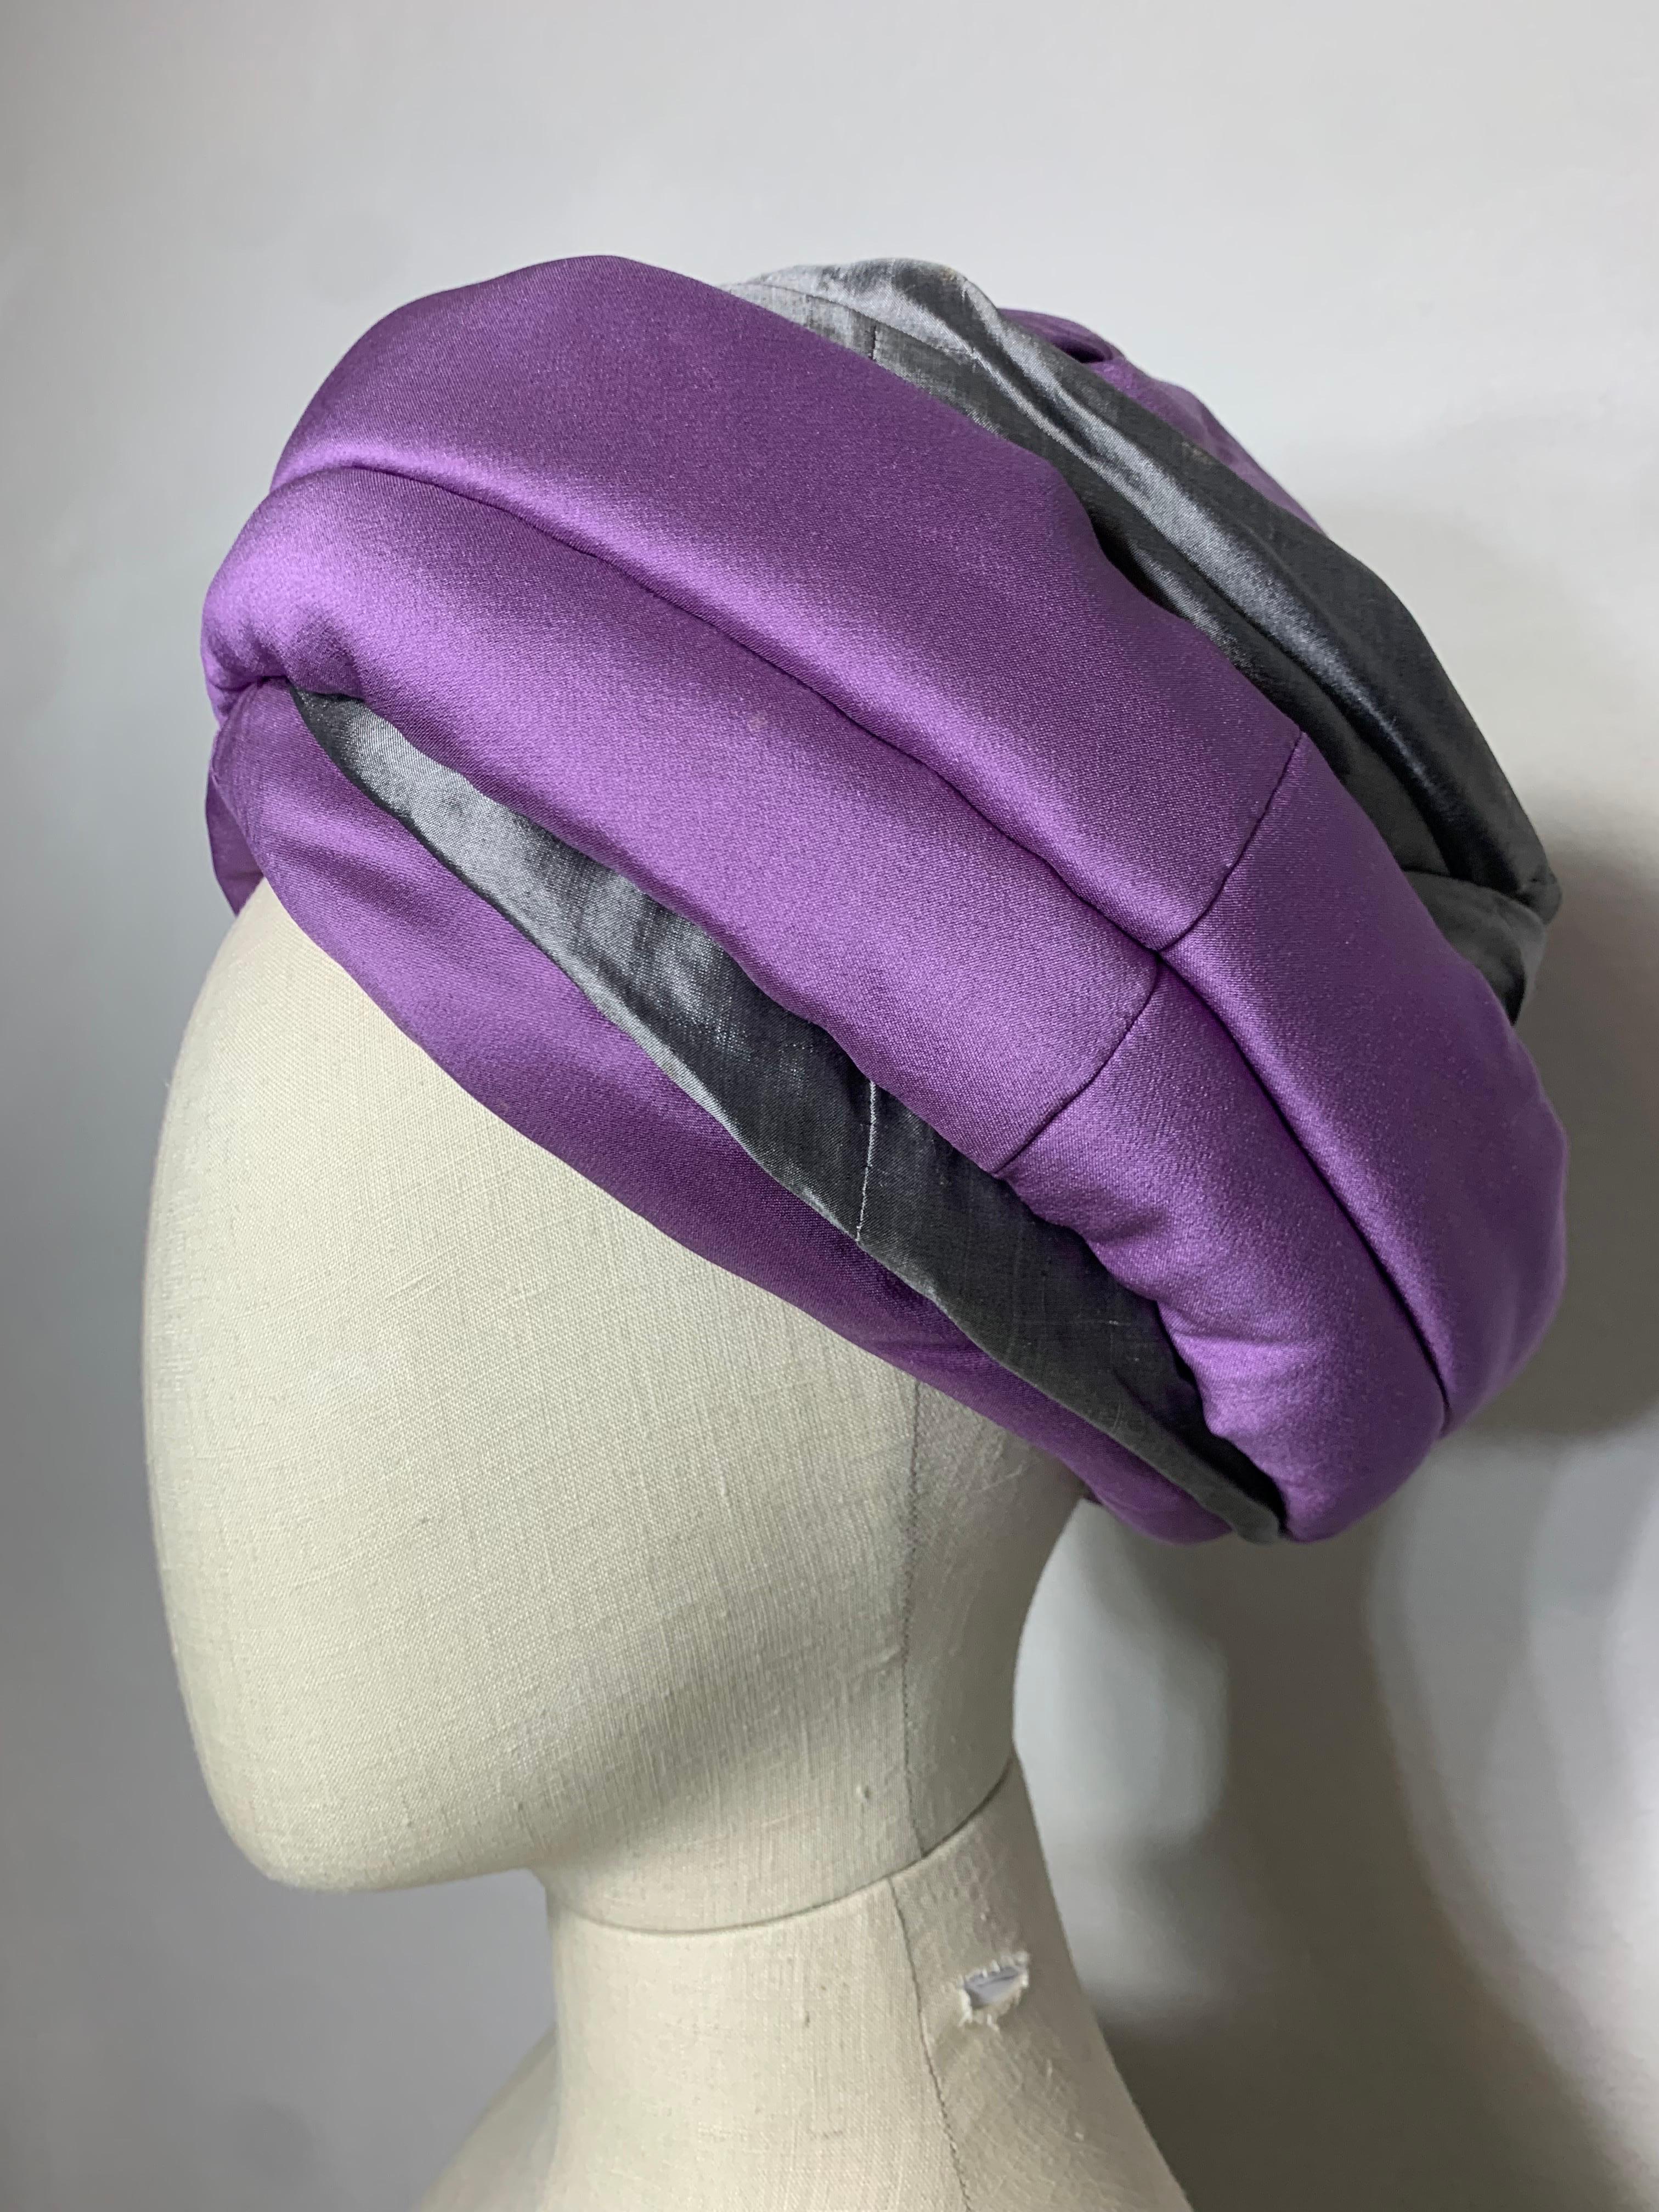 Custom-Made Suzanne Couture Millinery Purple & Gray Tufted & Draped Toque Turban w Hat Pin: Slightly peaked crown. Structured over a buckram base to give it height and high style. Draped and twisted contrasting purple and gray silk sharkskin is